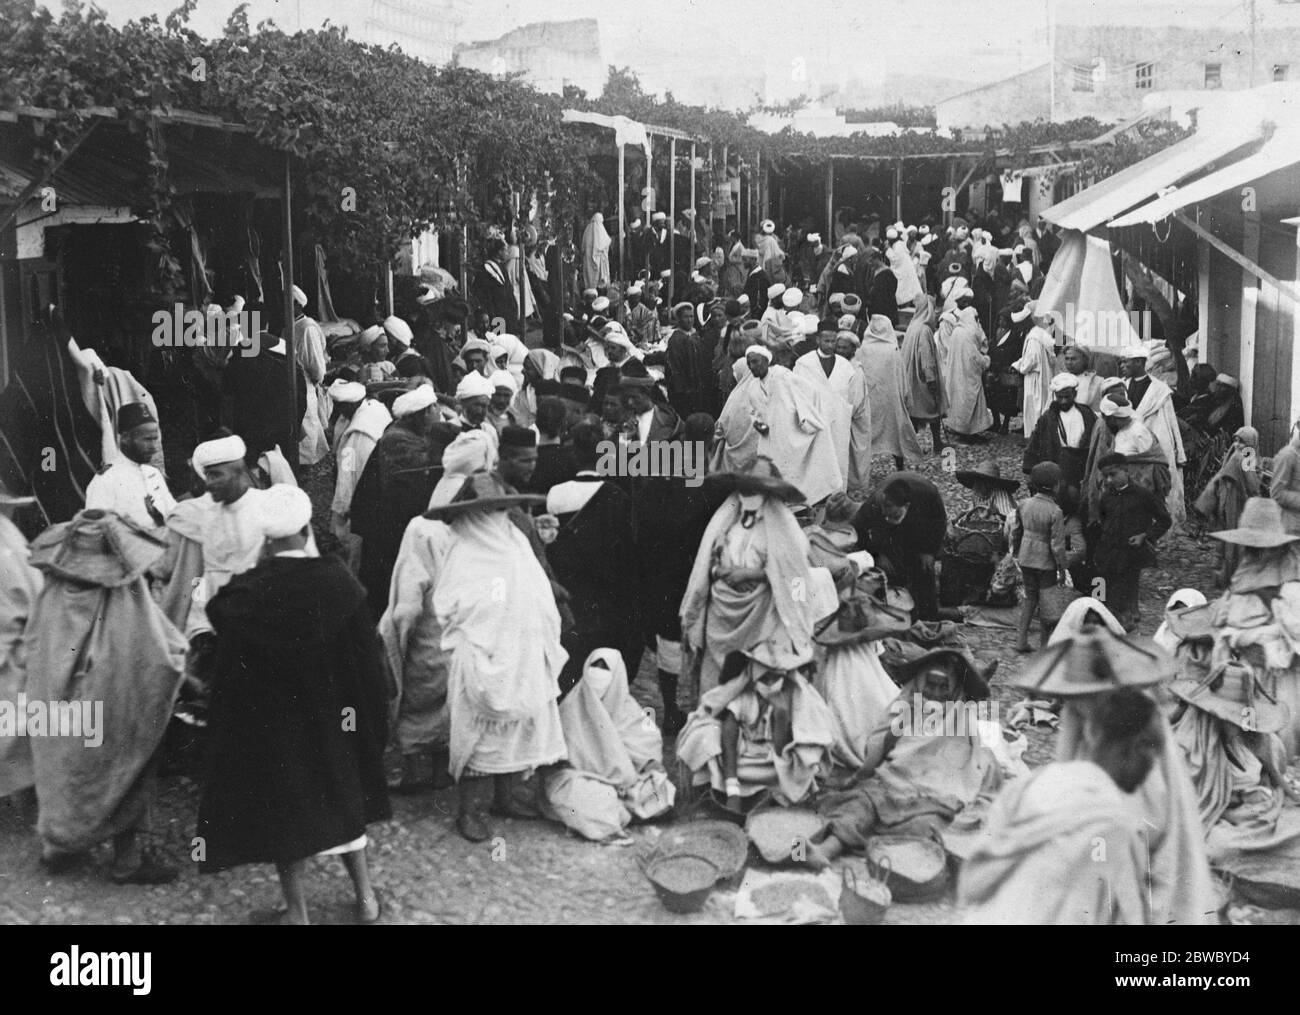 Claimed by Abd el Krim . Tetuan . The historic and typical Moorish town , to which it is said Abd el Krim claims as a condition of peace . 8 September 1925 Stock Photo